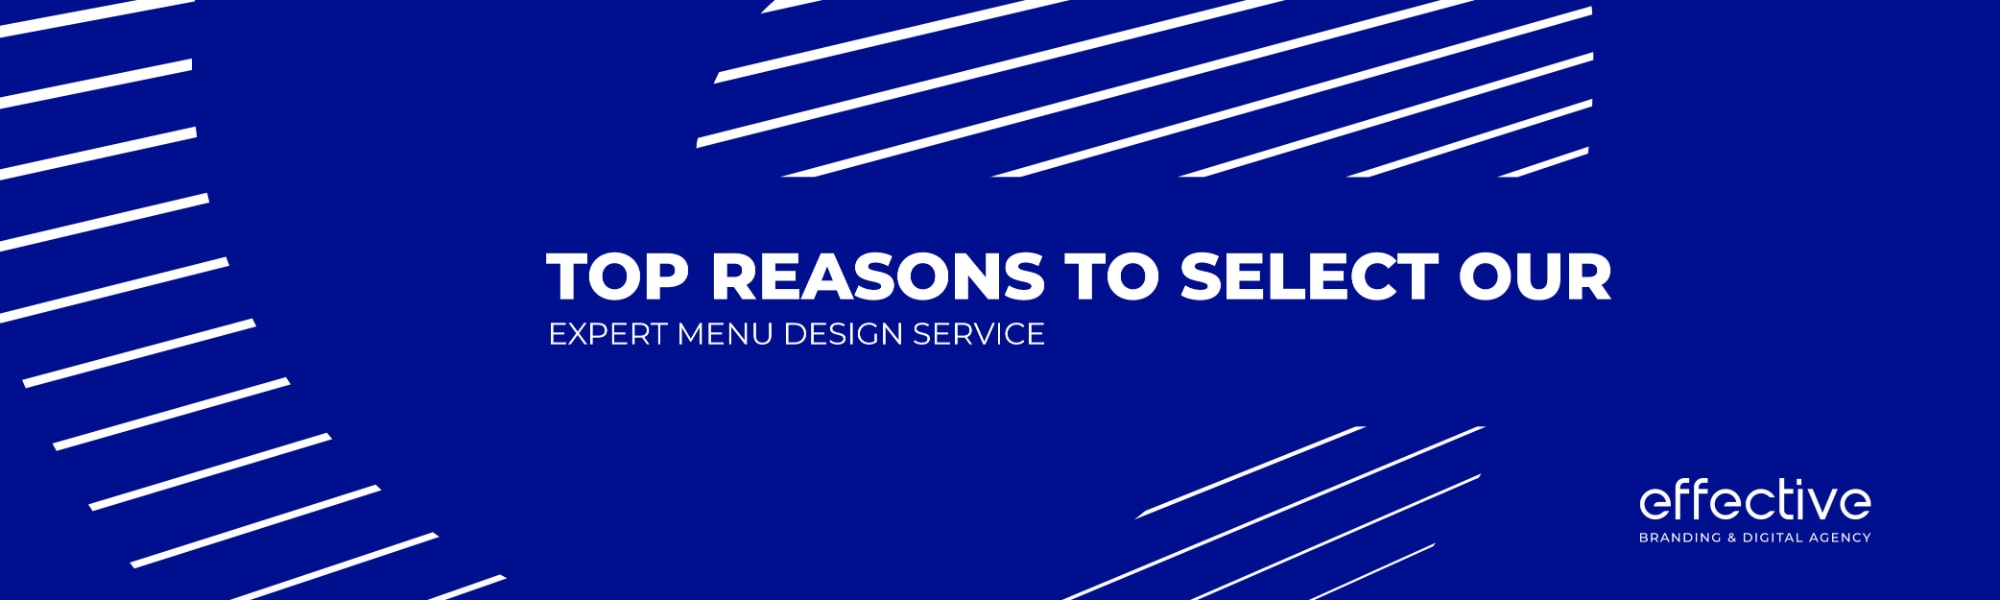 Top Reasons to Select Our Expert Menu Design Service